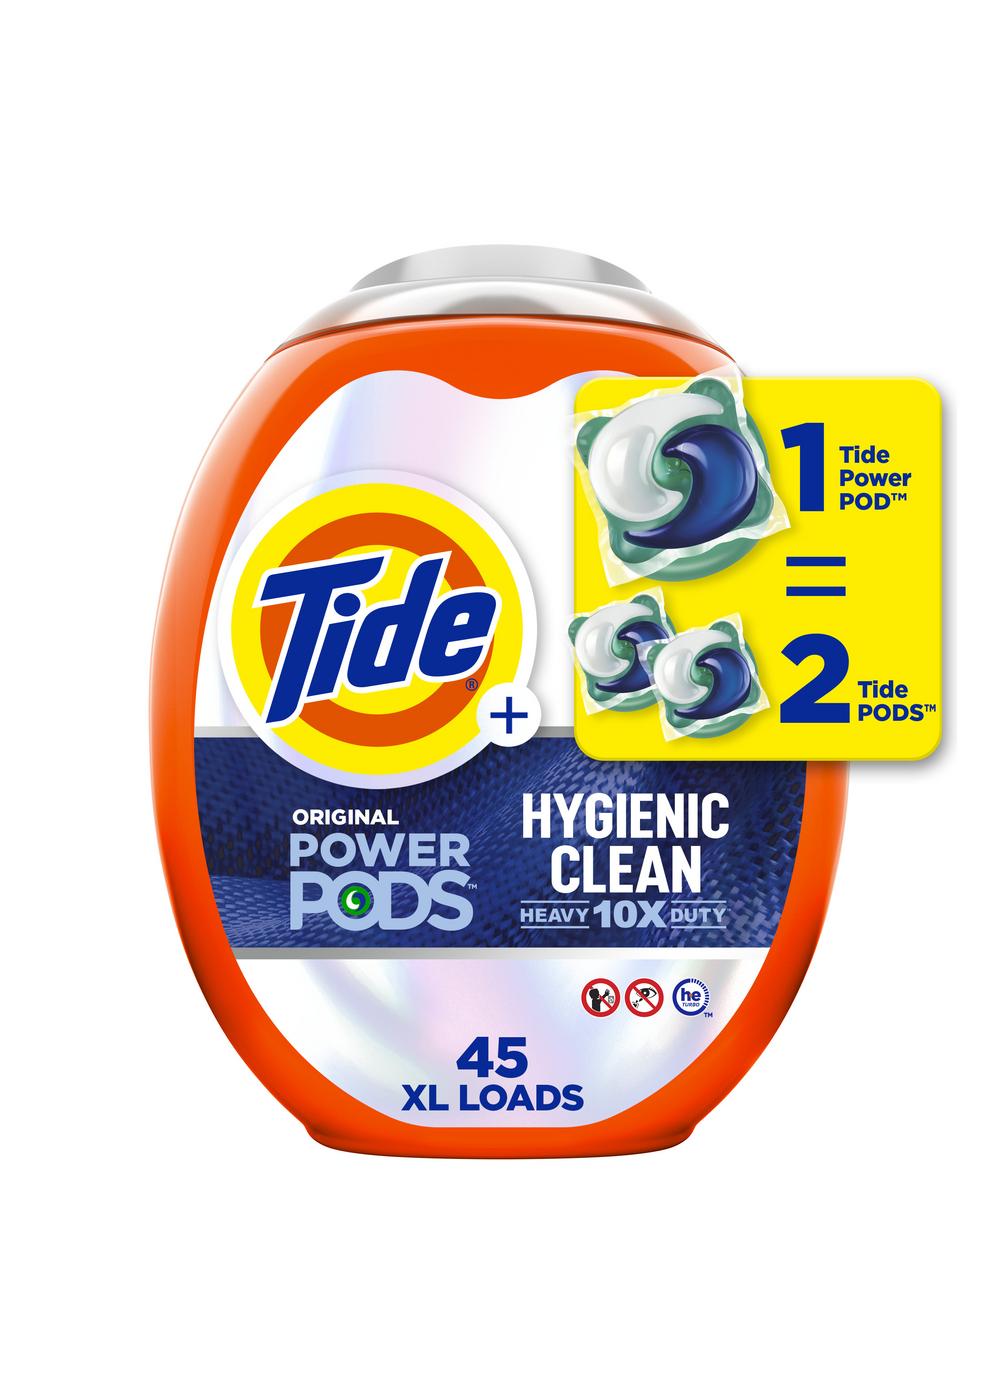 Tide Power PODS Hygienic Clean Heavy Duty Original HE Laundry Detergent; image 1 of 5